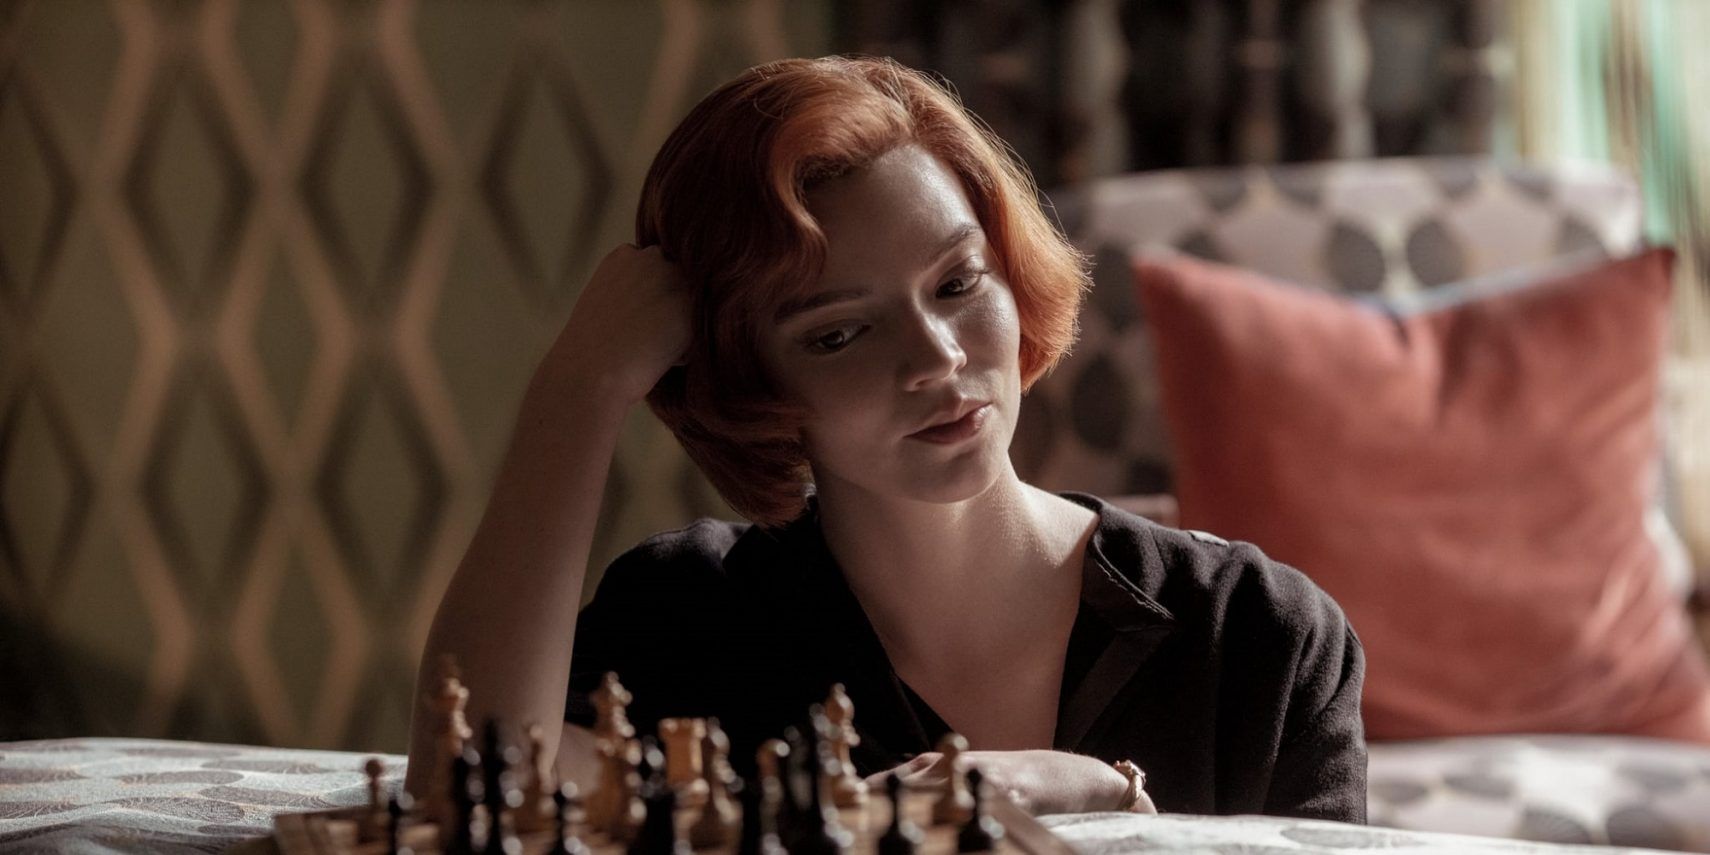 Beth playing chess in The Queen's Gambit.